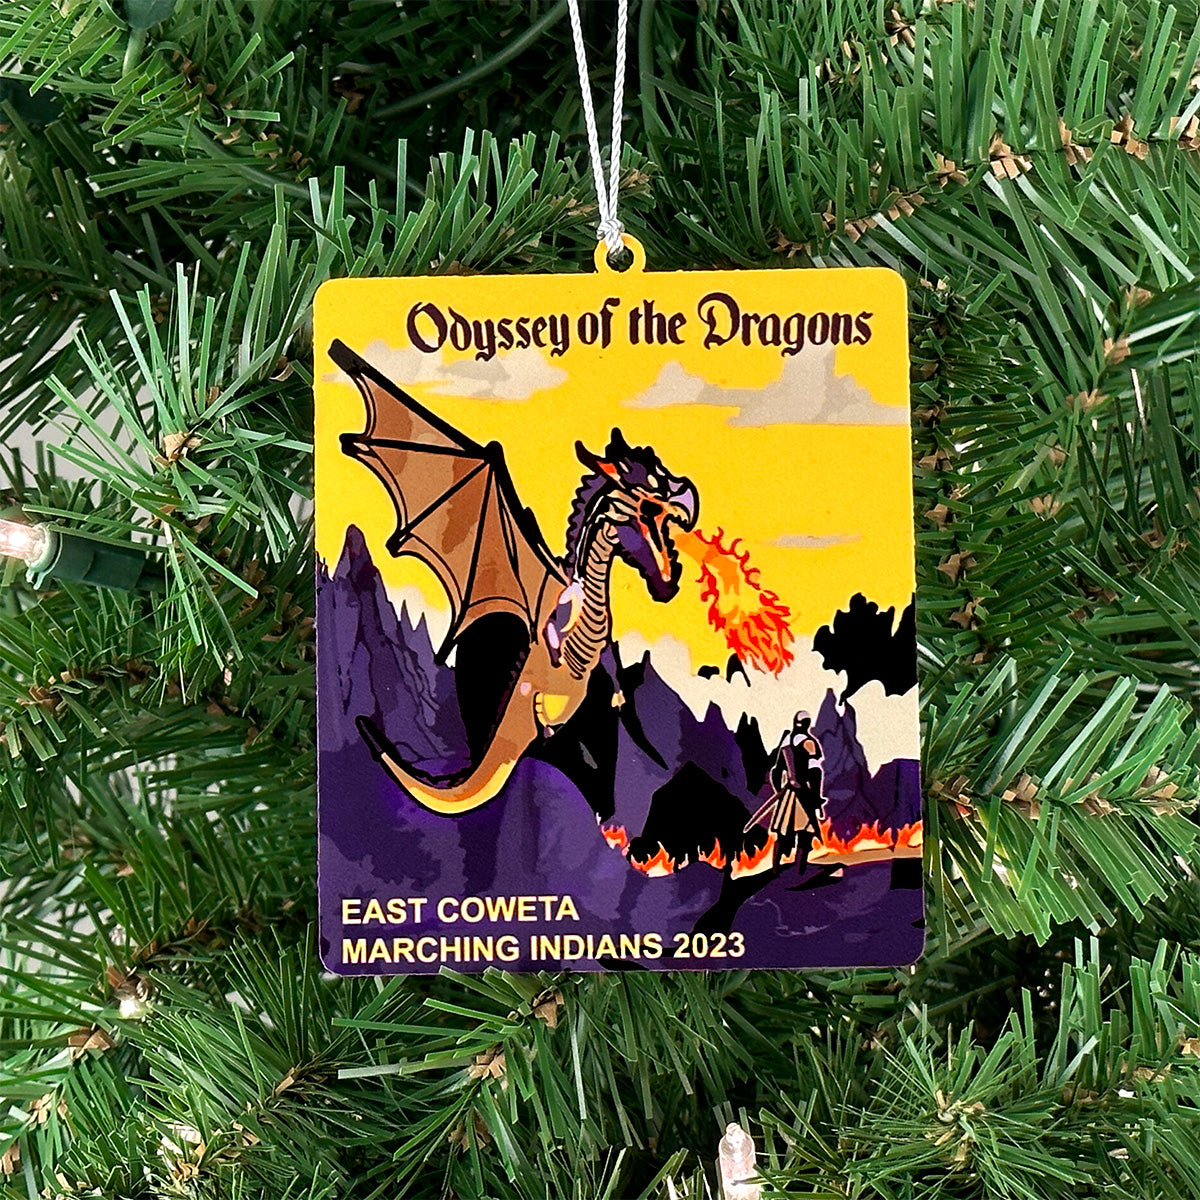 East Coweta "Odyssey of the Dragons" 2023 Ornament